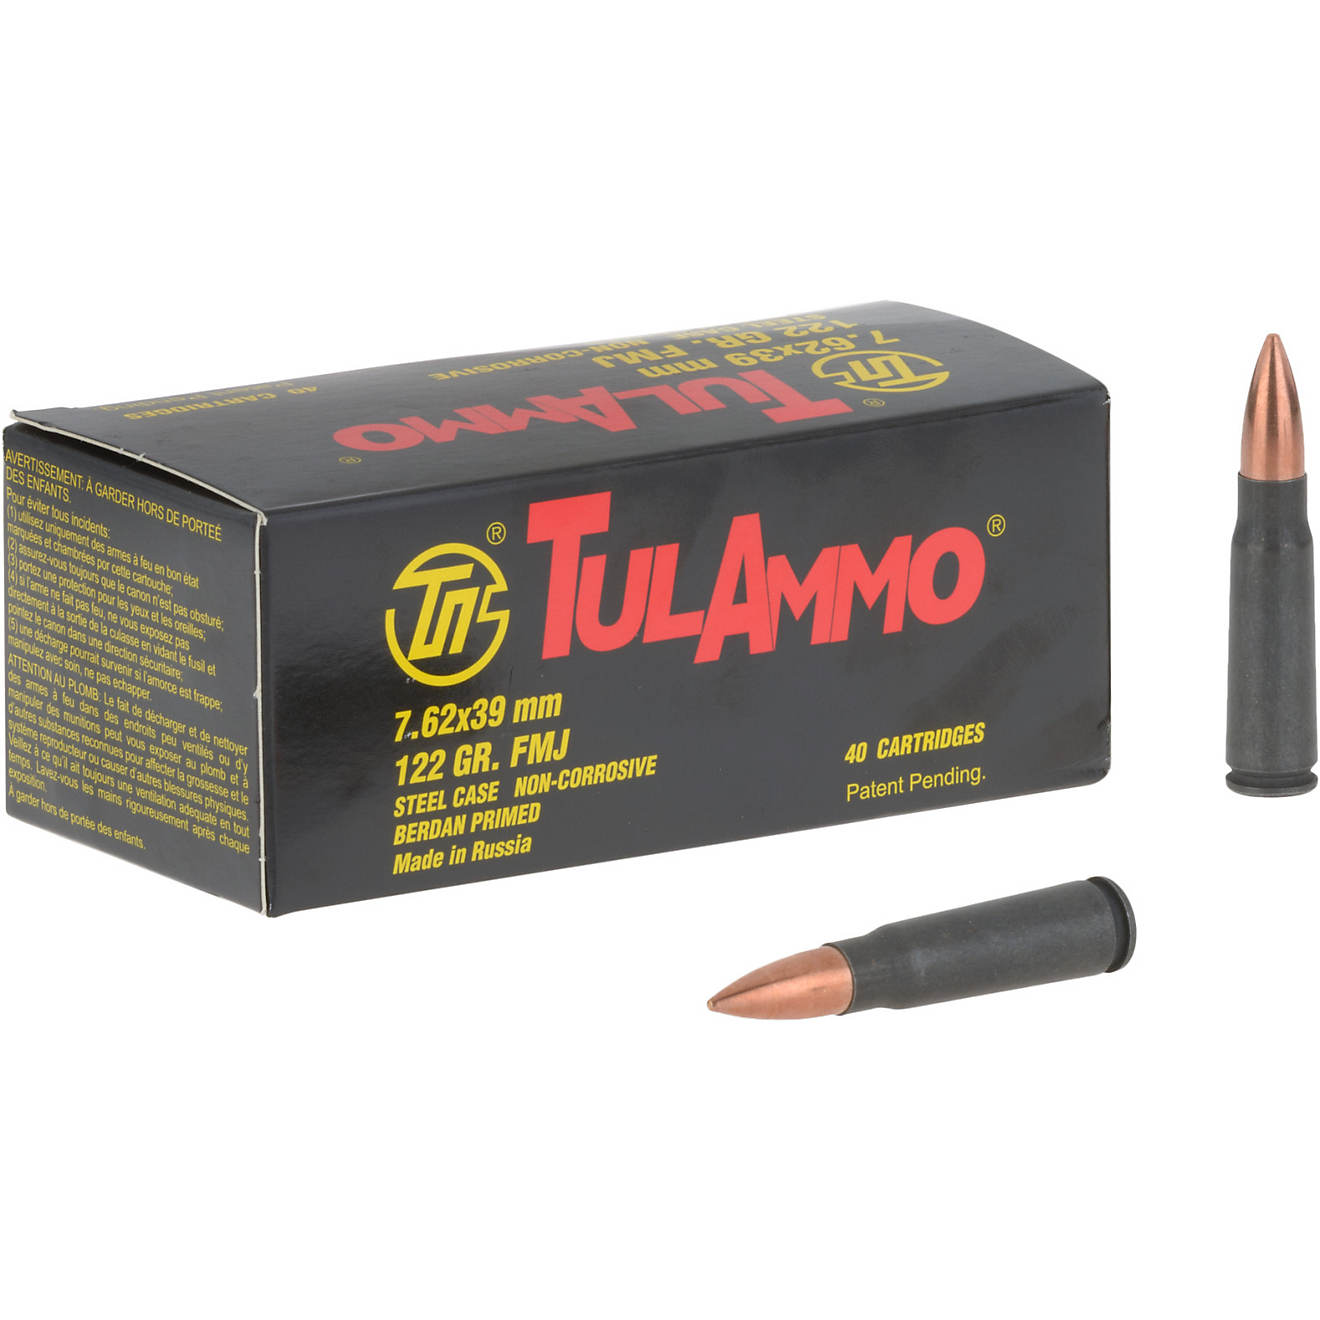 TulAmmo 7.62x39mm 122-Grain 40-round Rifle Ammunition - 40 Rounds                                                                - view number 1